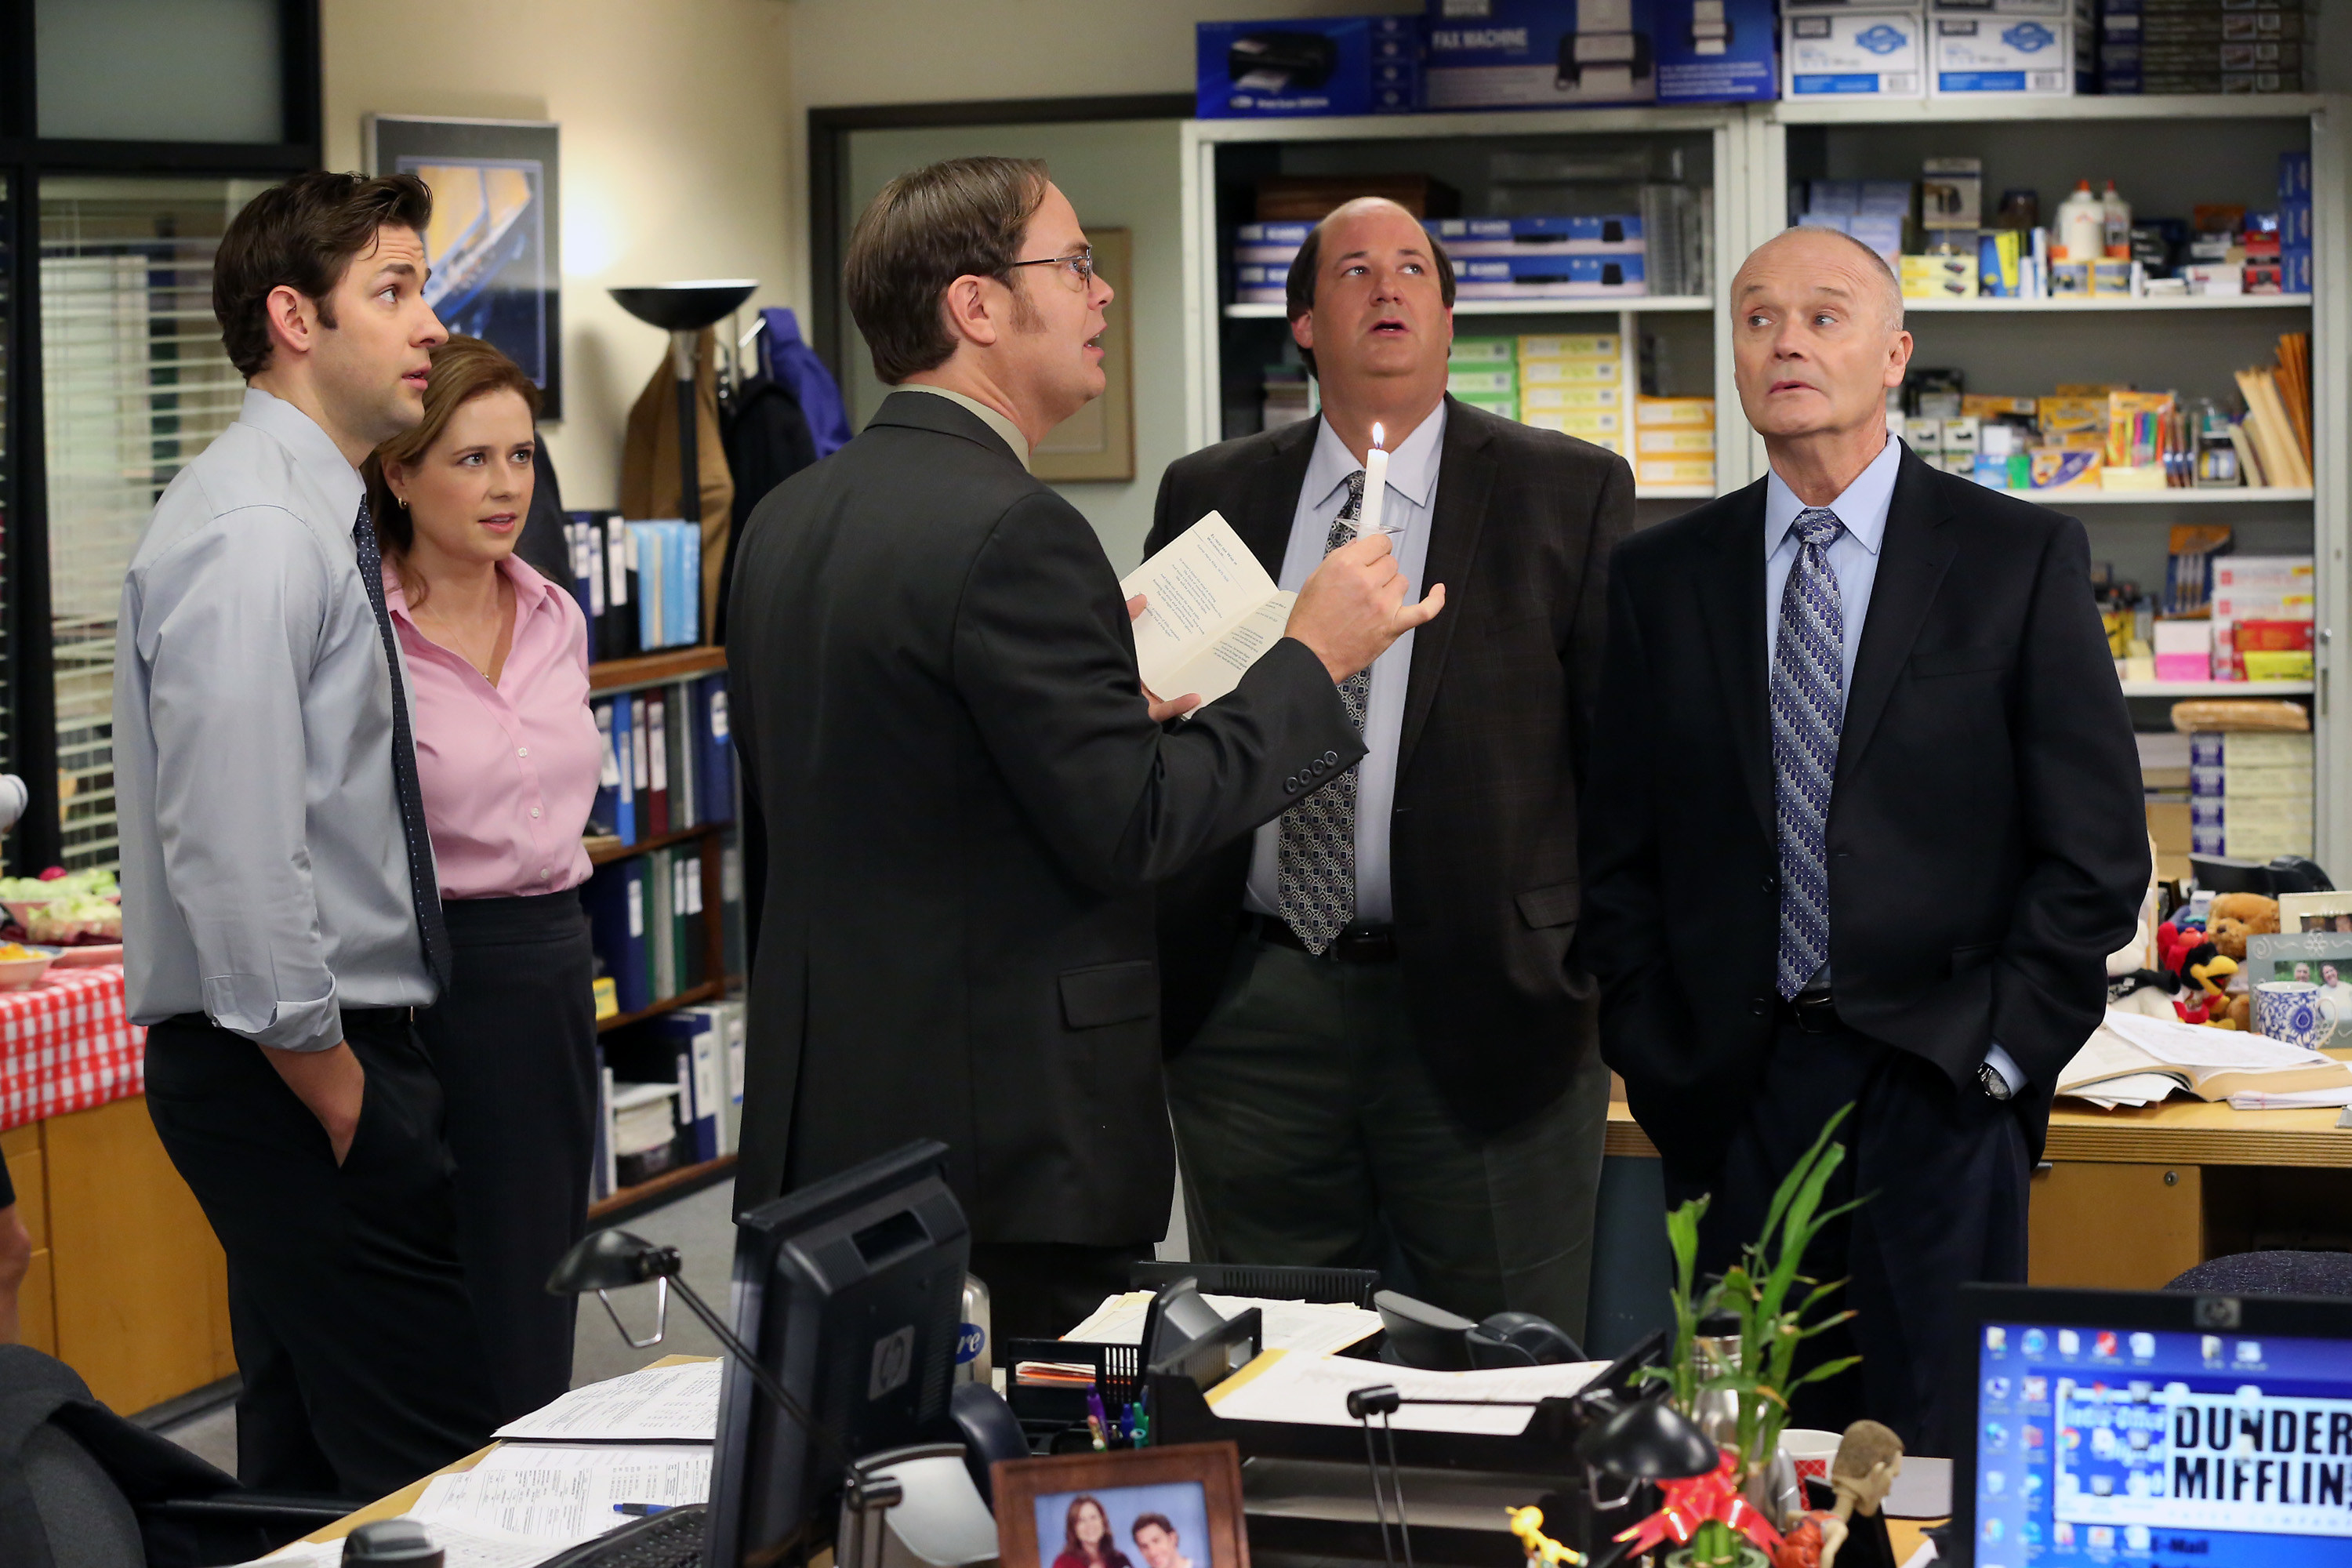 the cast talking in the office around the desks